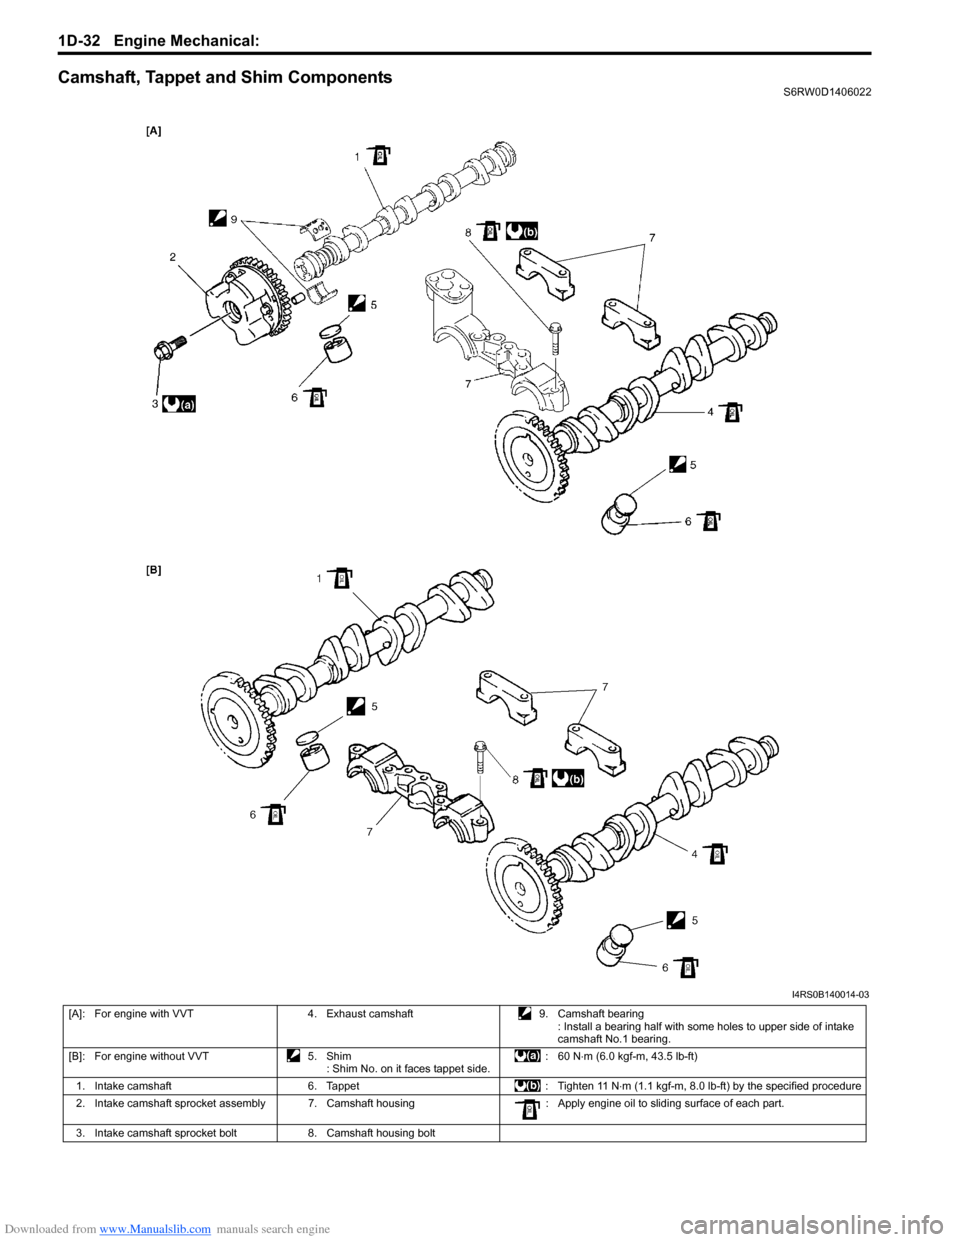 SUZUKI SX4 2006 1.G Service Workshop Manual Downloaded from www.Manualslib.com manuals search engine 1D-32 Engine Mechanical: 
Camshaft, Tappet and Shim ComponentsS6RW0D1406022
I4RS0B140014-03
[A]: For engine with VVT 4. Exhaust camshaft  9. Ca